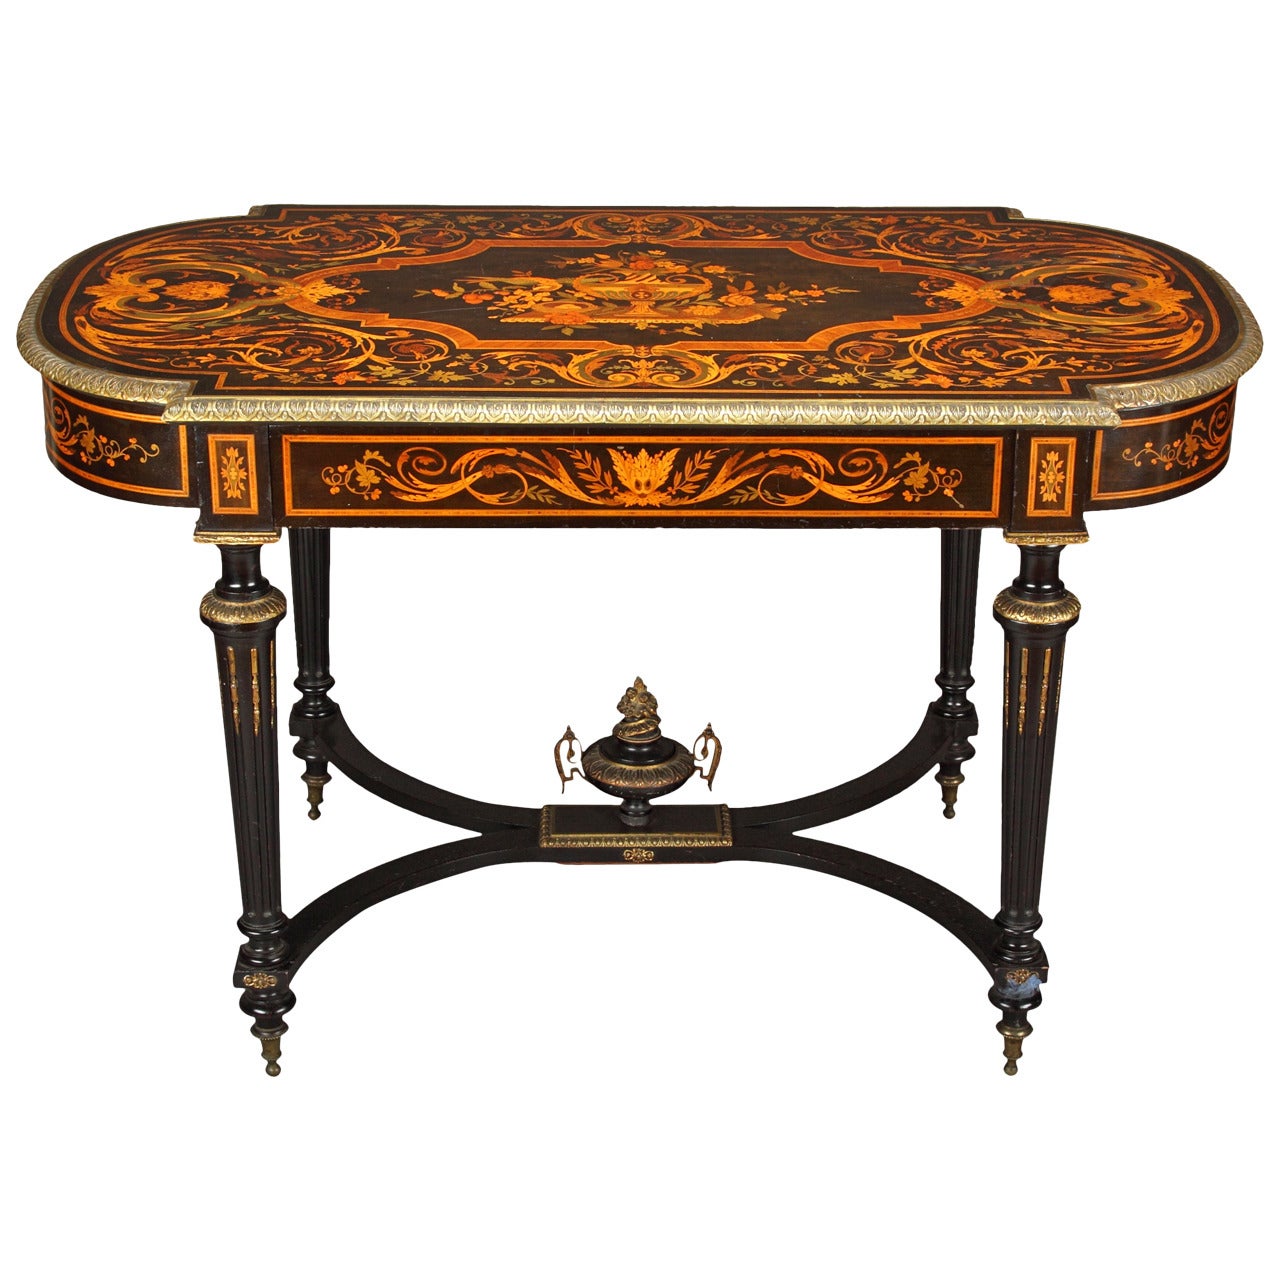 New York Neo-Grec Marquetry Inlay Bronze Mounted Ebonized Table For Sale